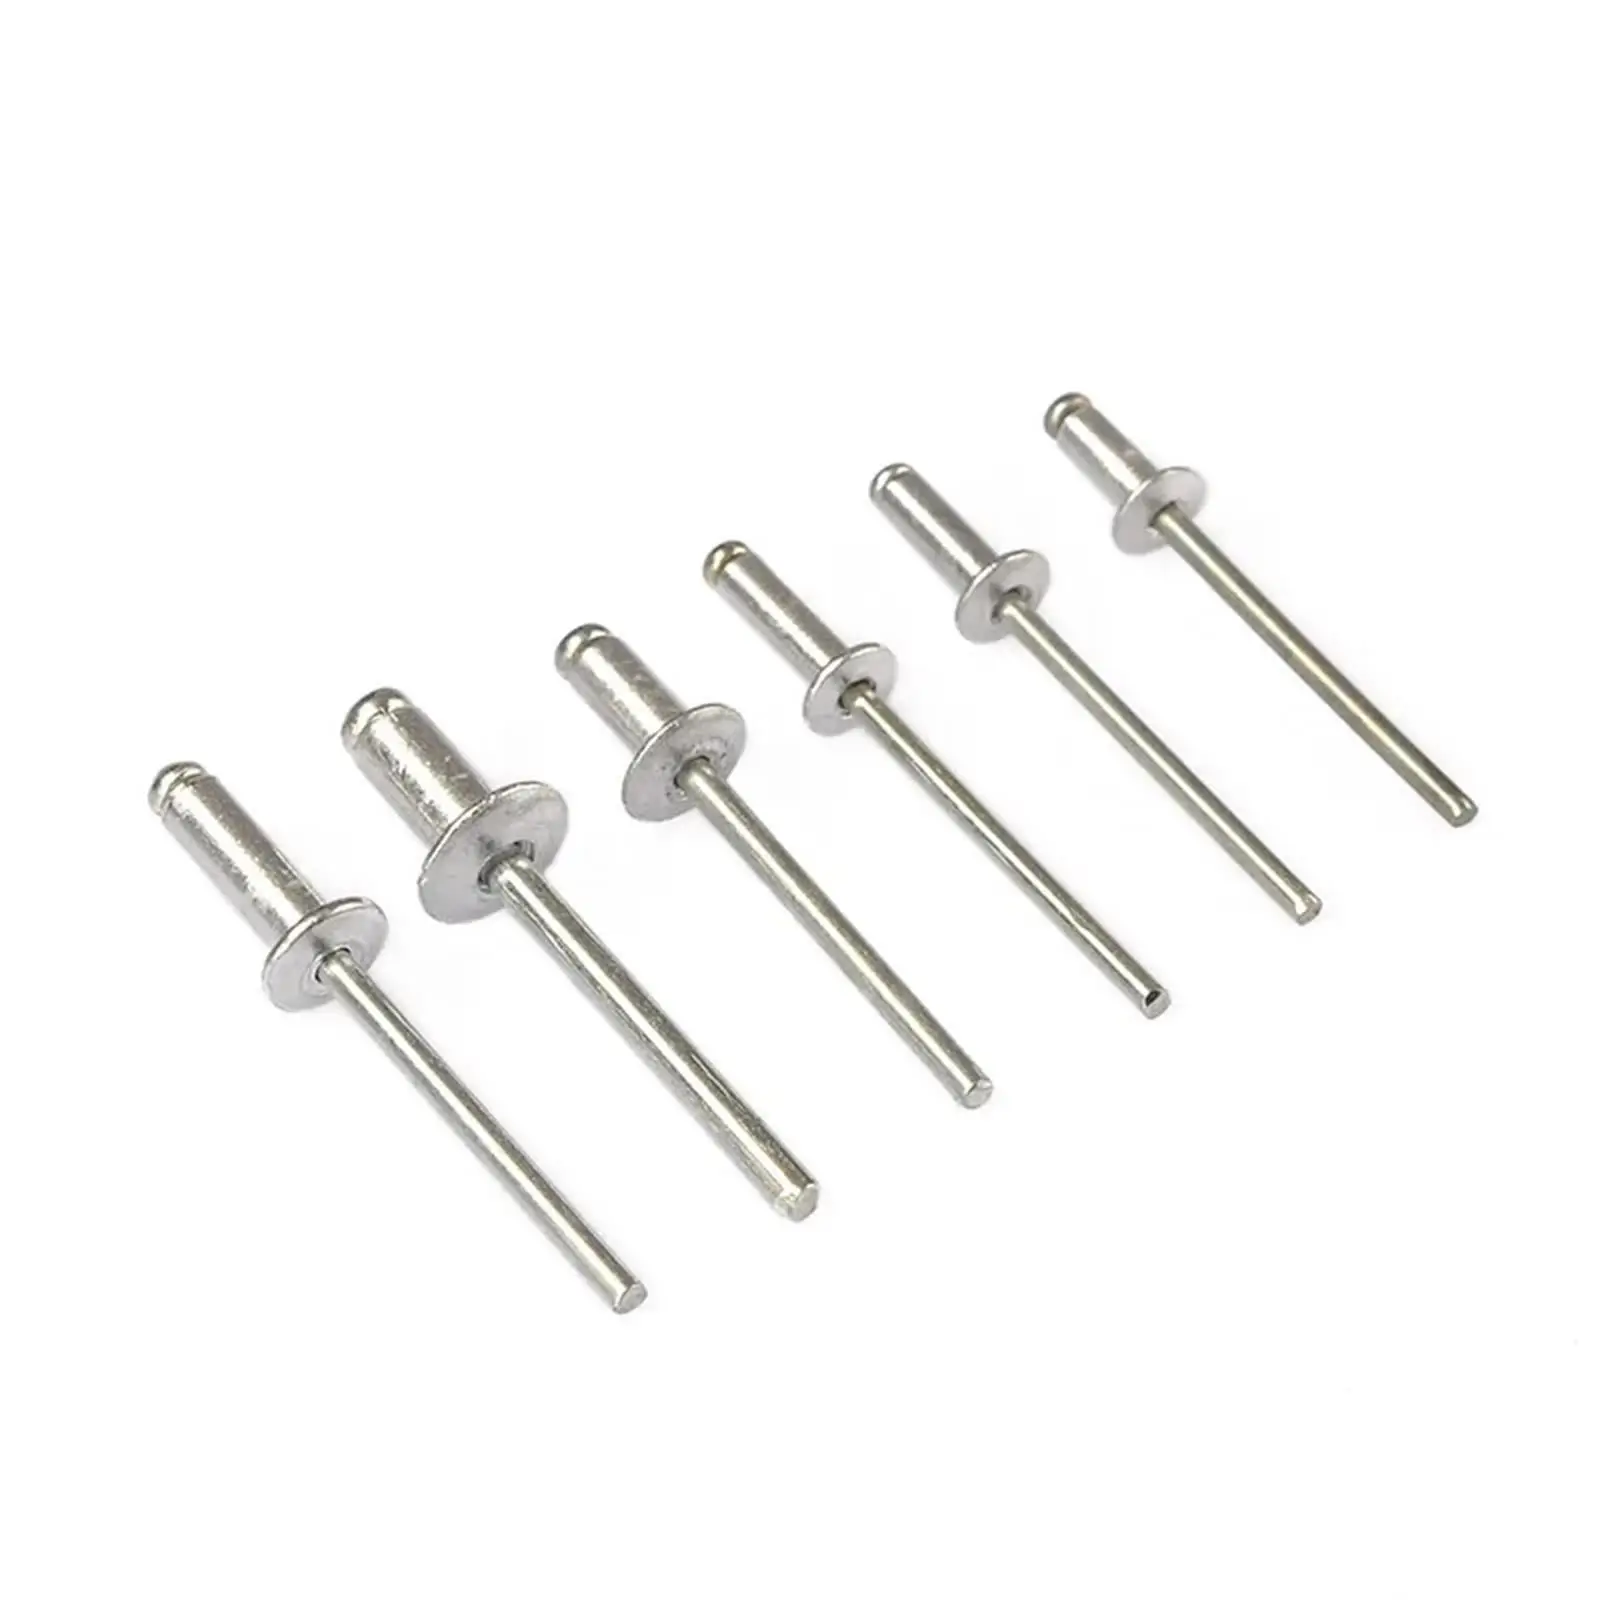 120 Pieces Blind Rivets for Installing Accessories Low Tensile and Shear Strength Portable Aluminum Rivets Heavy Duty Fastener